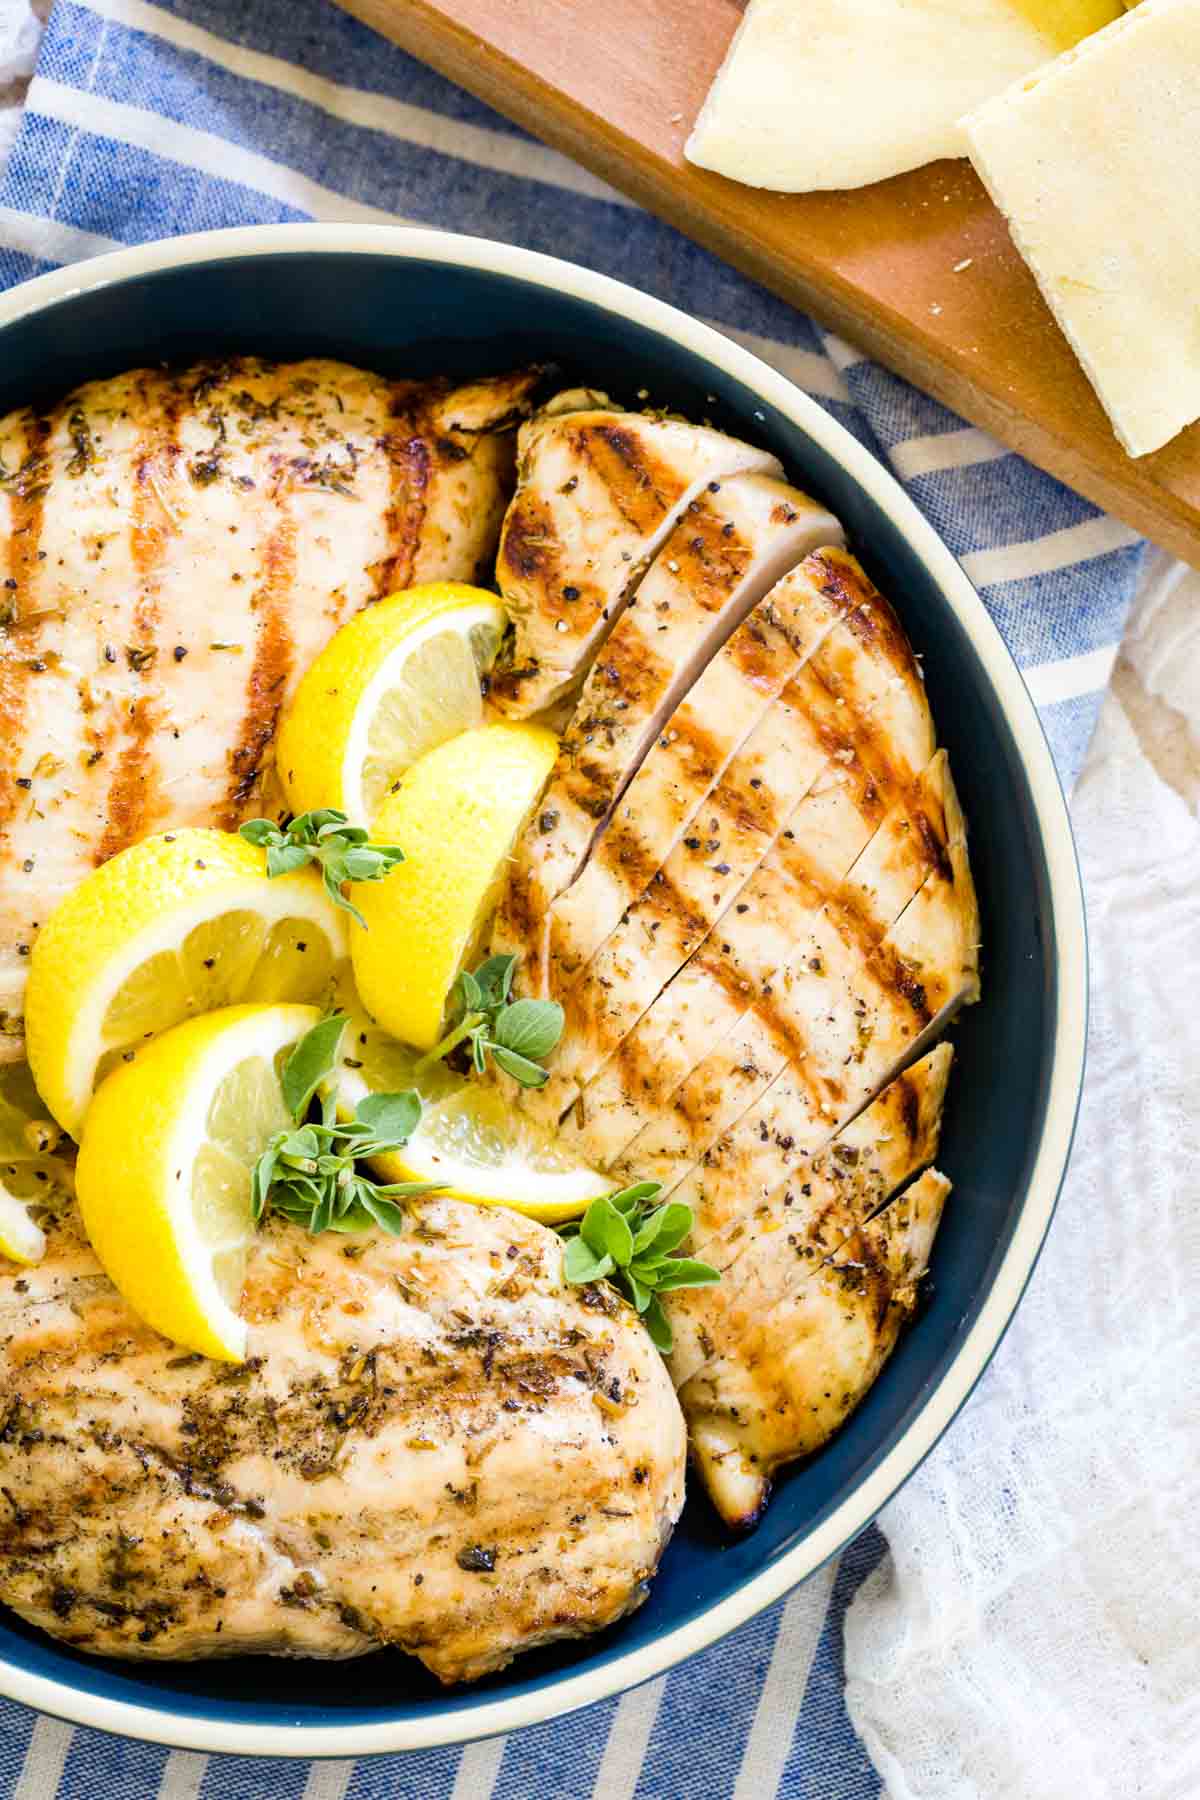 Grilled chicken with lemon in a bowl.